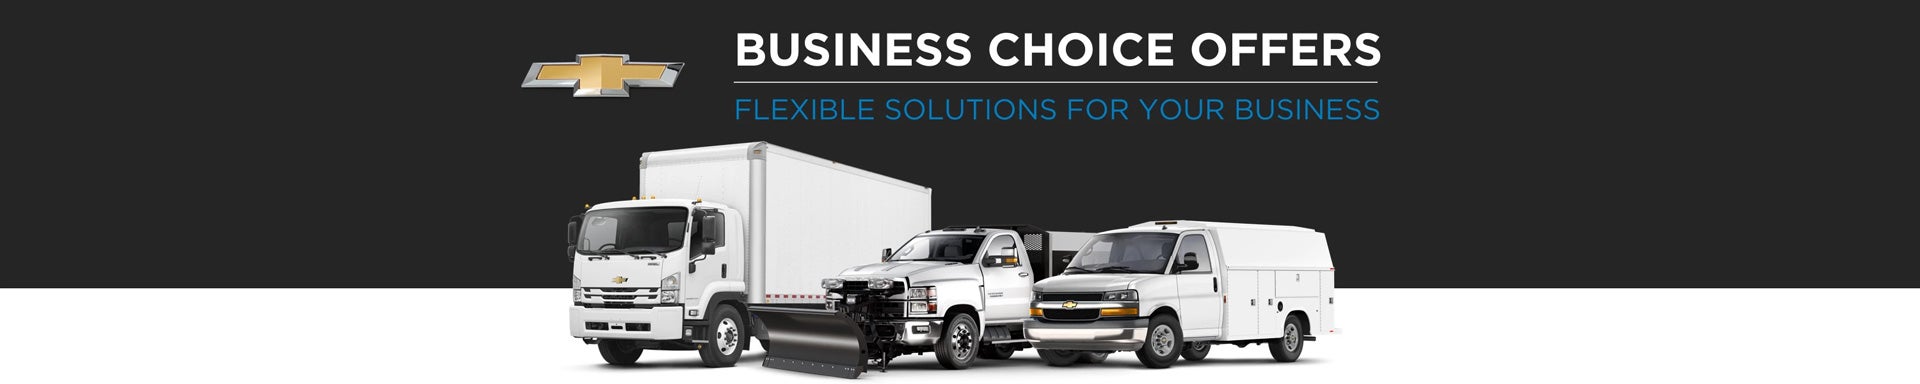 Chevrolet Business Choice Offers - Flexible Solutions for your Business - SVG Chevrolet GMC Washington Court House in Washington Court House OH